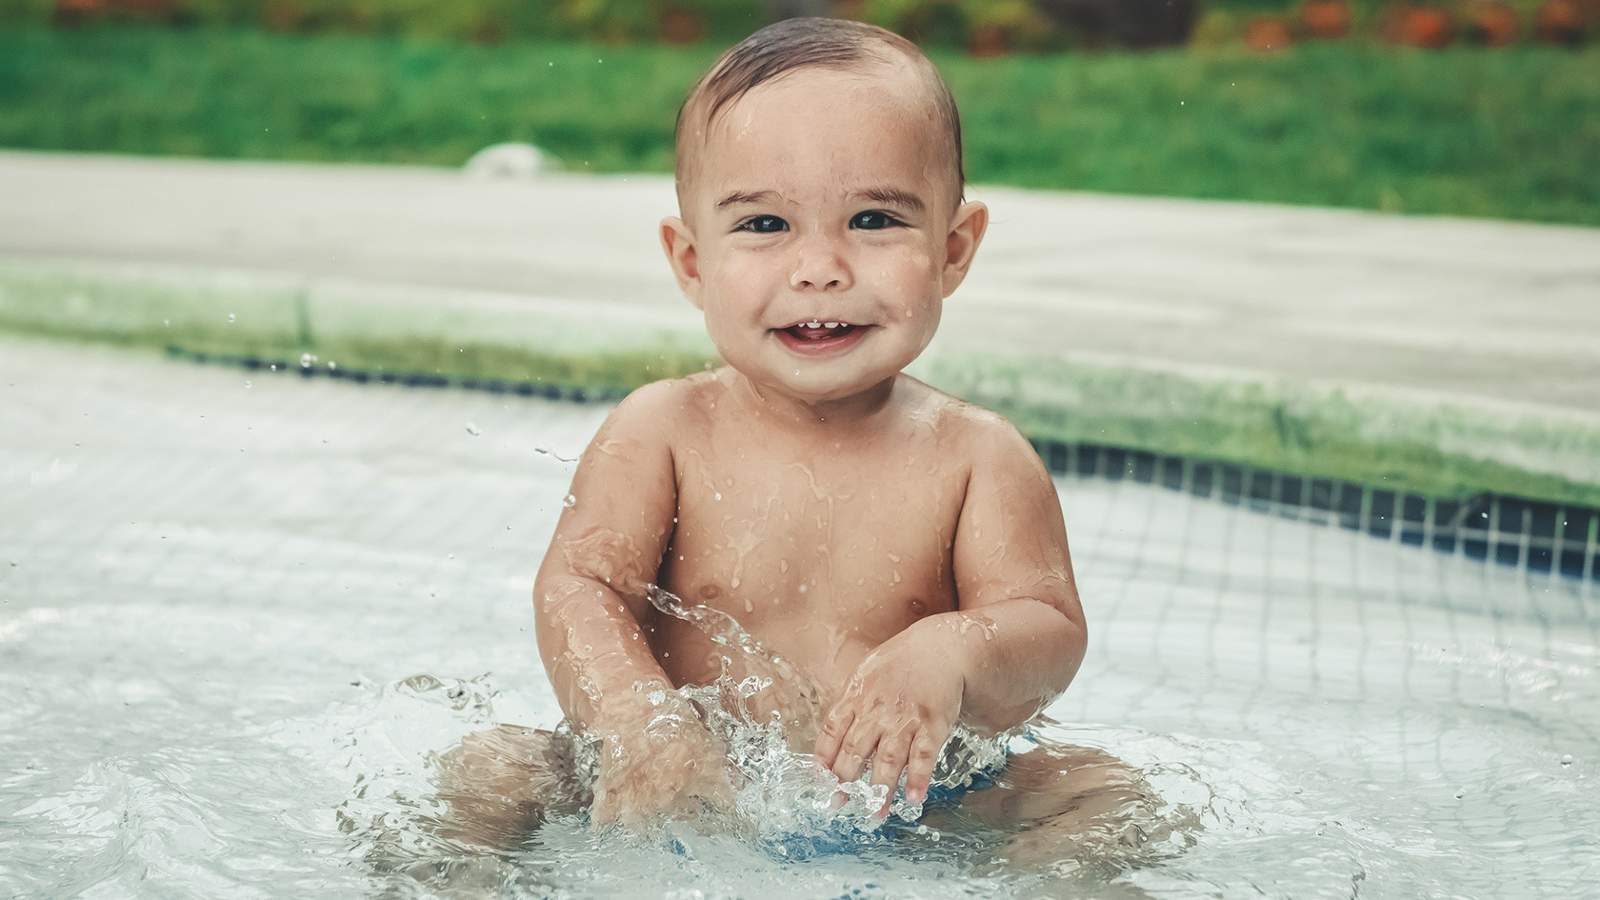 What to know to keep your kids safe during backyard water activities